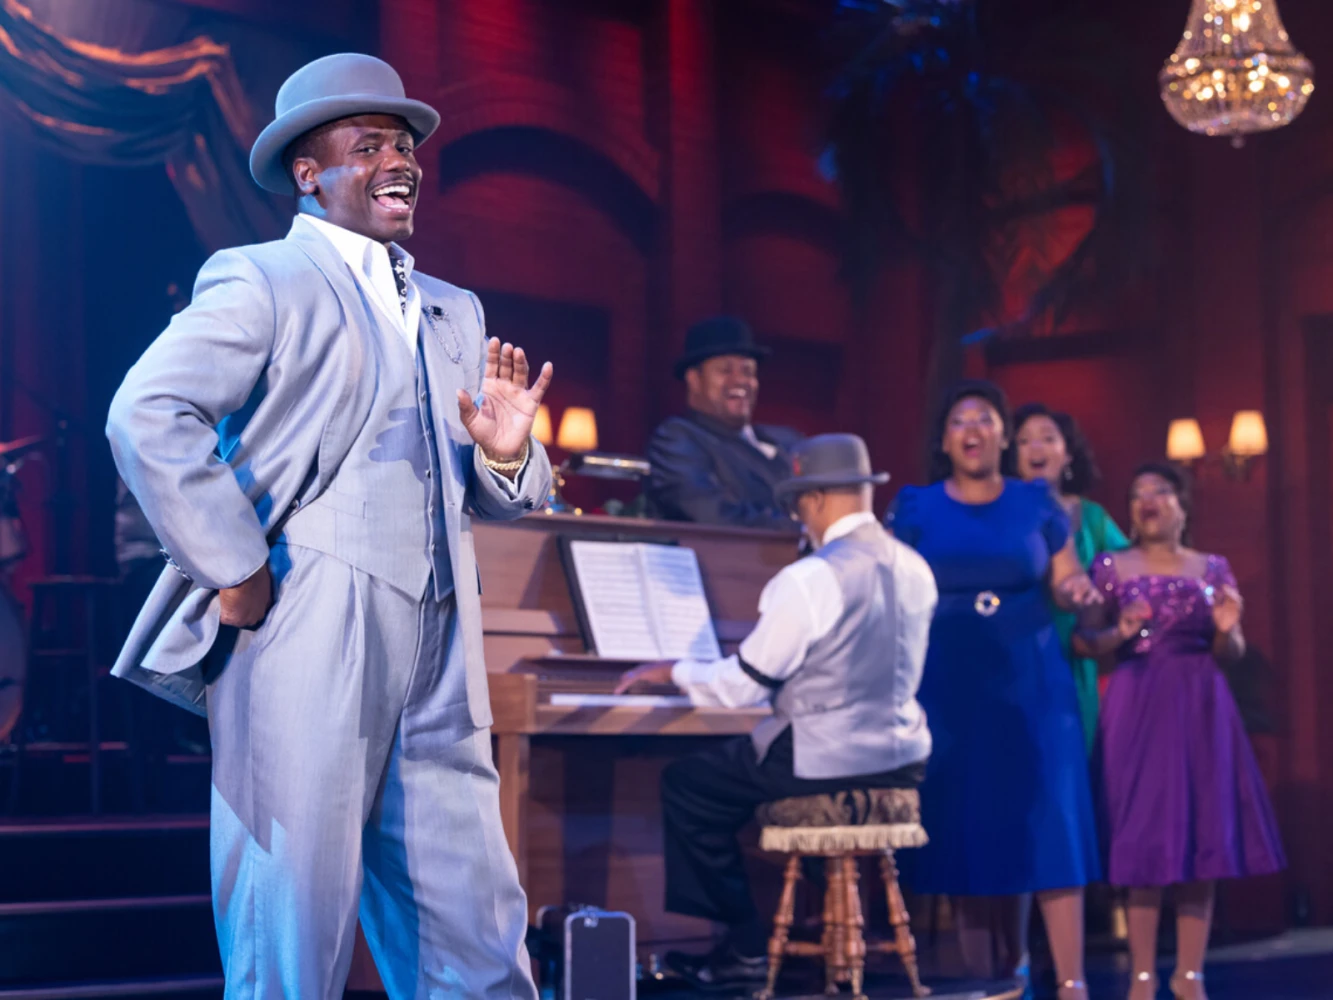 Ain't Misbehavin': What to expect - 5